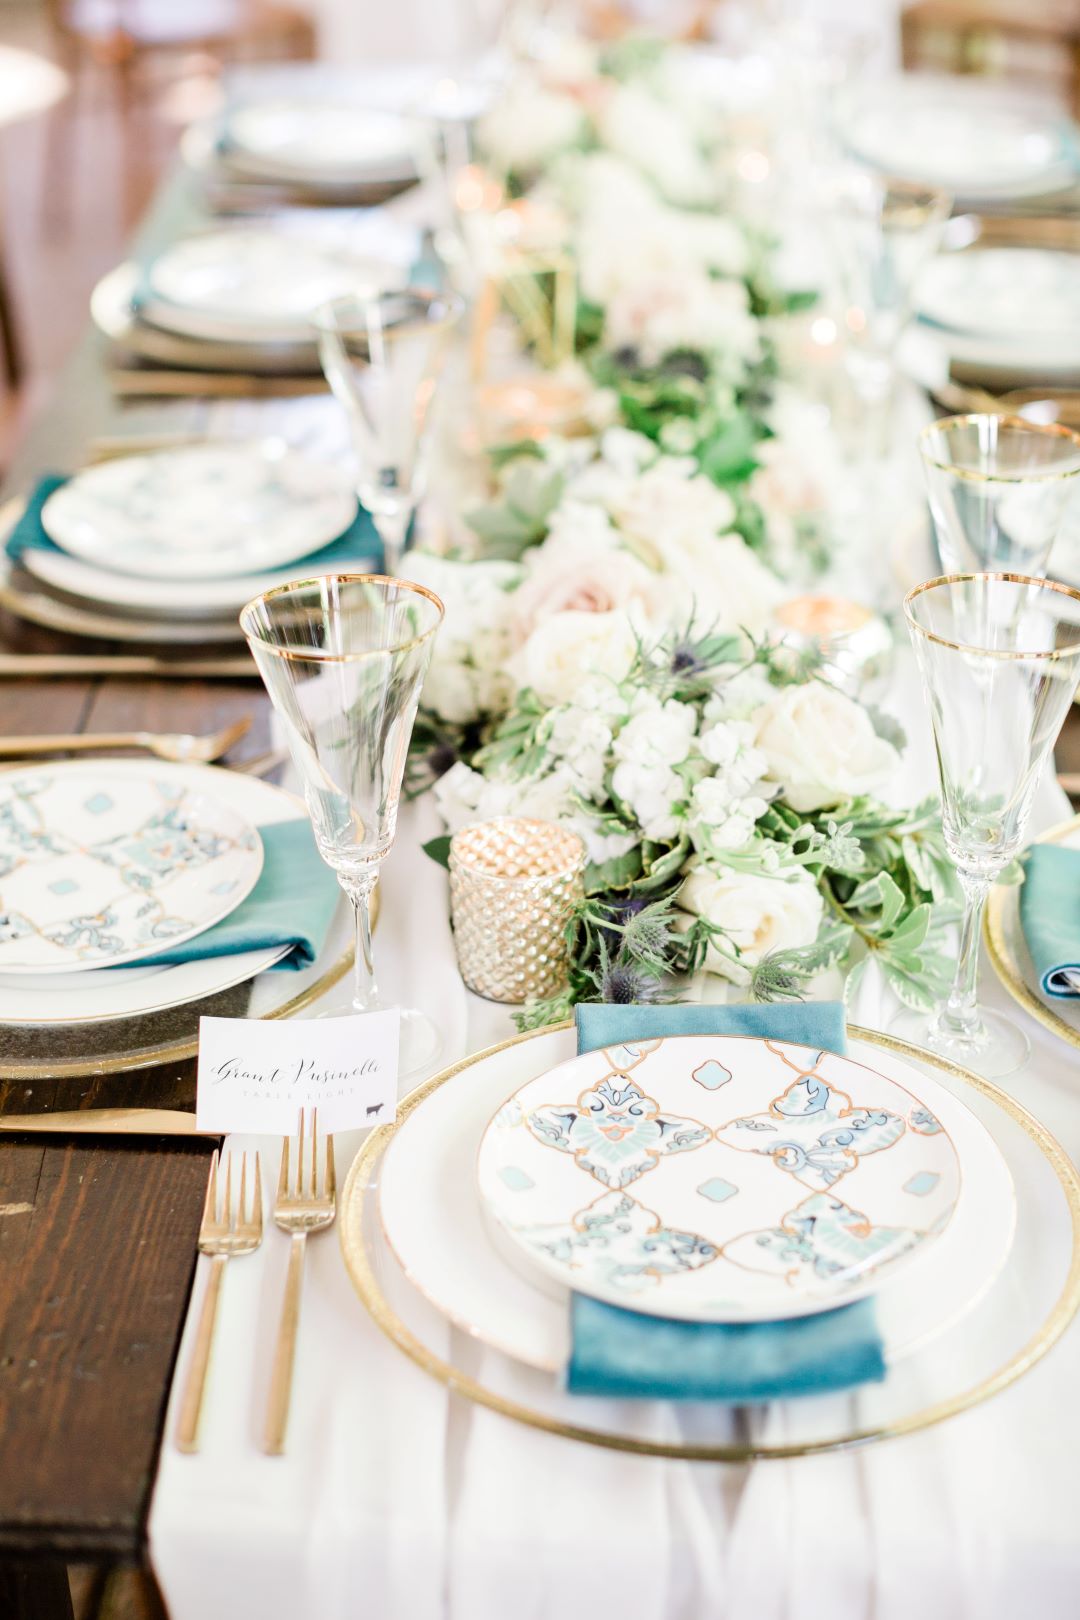 CJ's Off The Square | Classic blue linens and printed plates with blush and white floral table runner